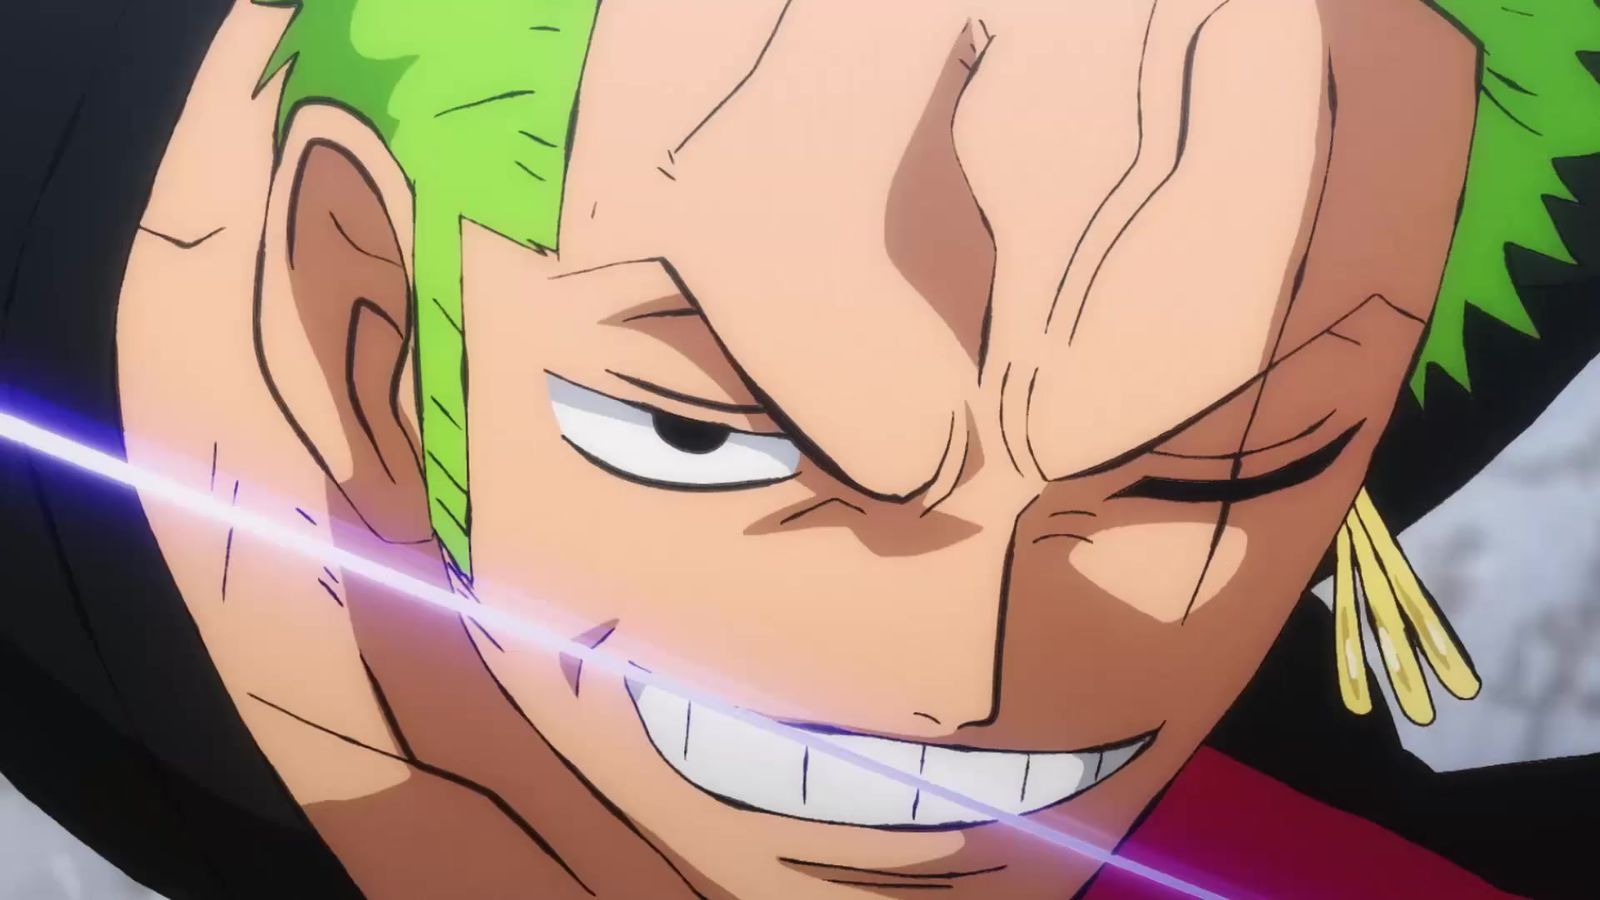 Roronoa Zoro in the Wano arc of the One Piece anime.